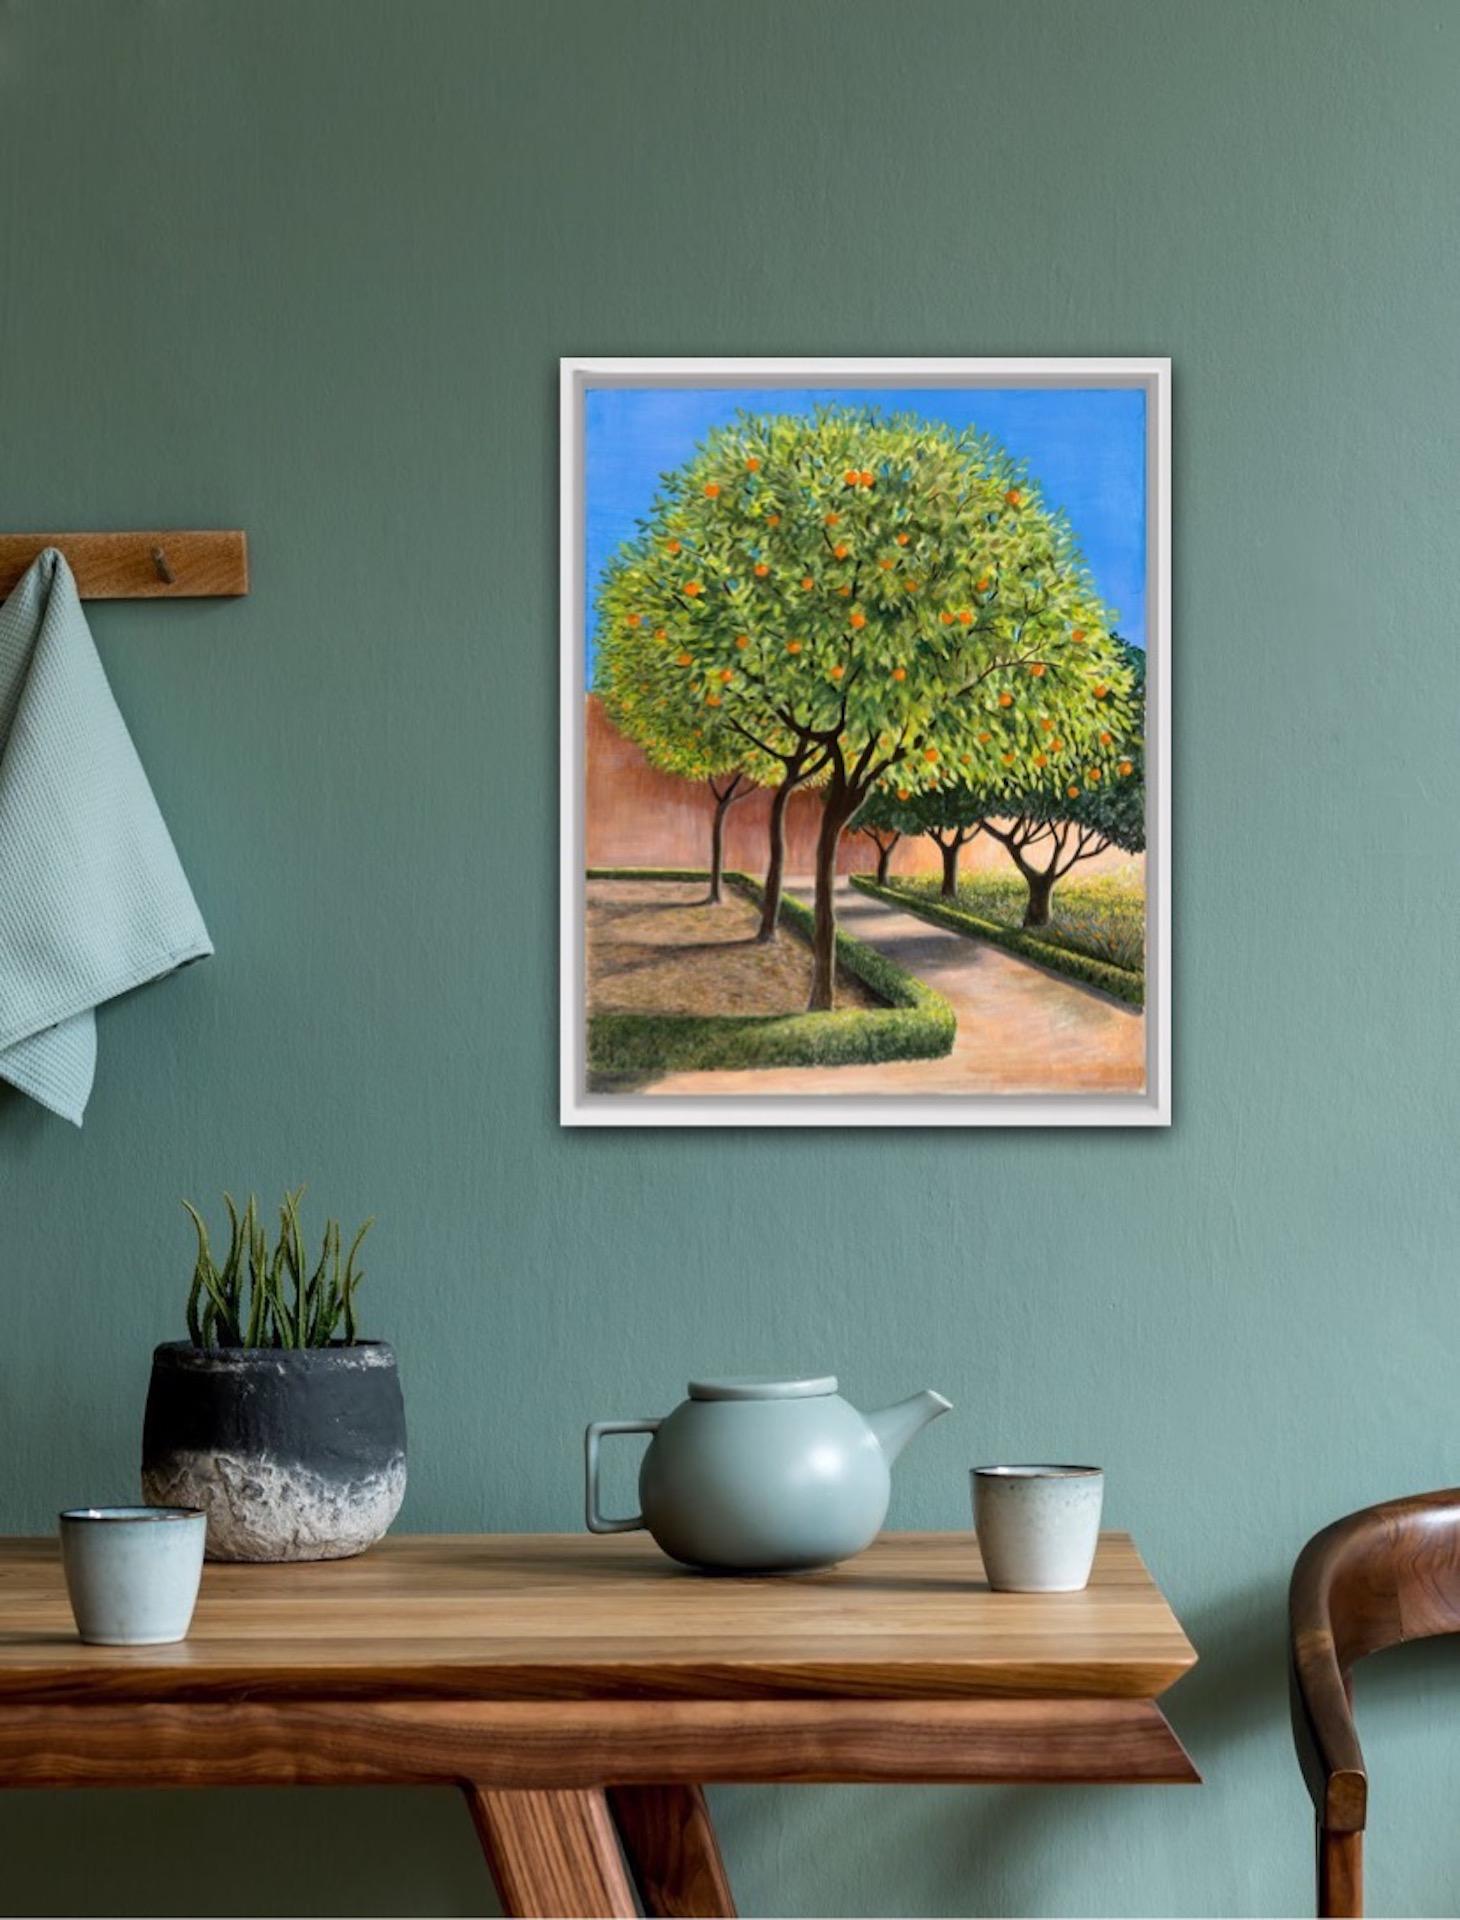 Jane Peart
Orange Trees
Original Painting
Acrylic on Canvas
51cm x 40cm
Sold unframed
Free shipping
Please note that in situ images are purely an indication of how a piece may look.

Orange Trees is an original acrylic painting, it was inspired by